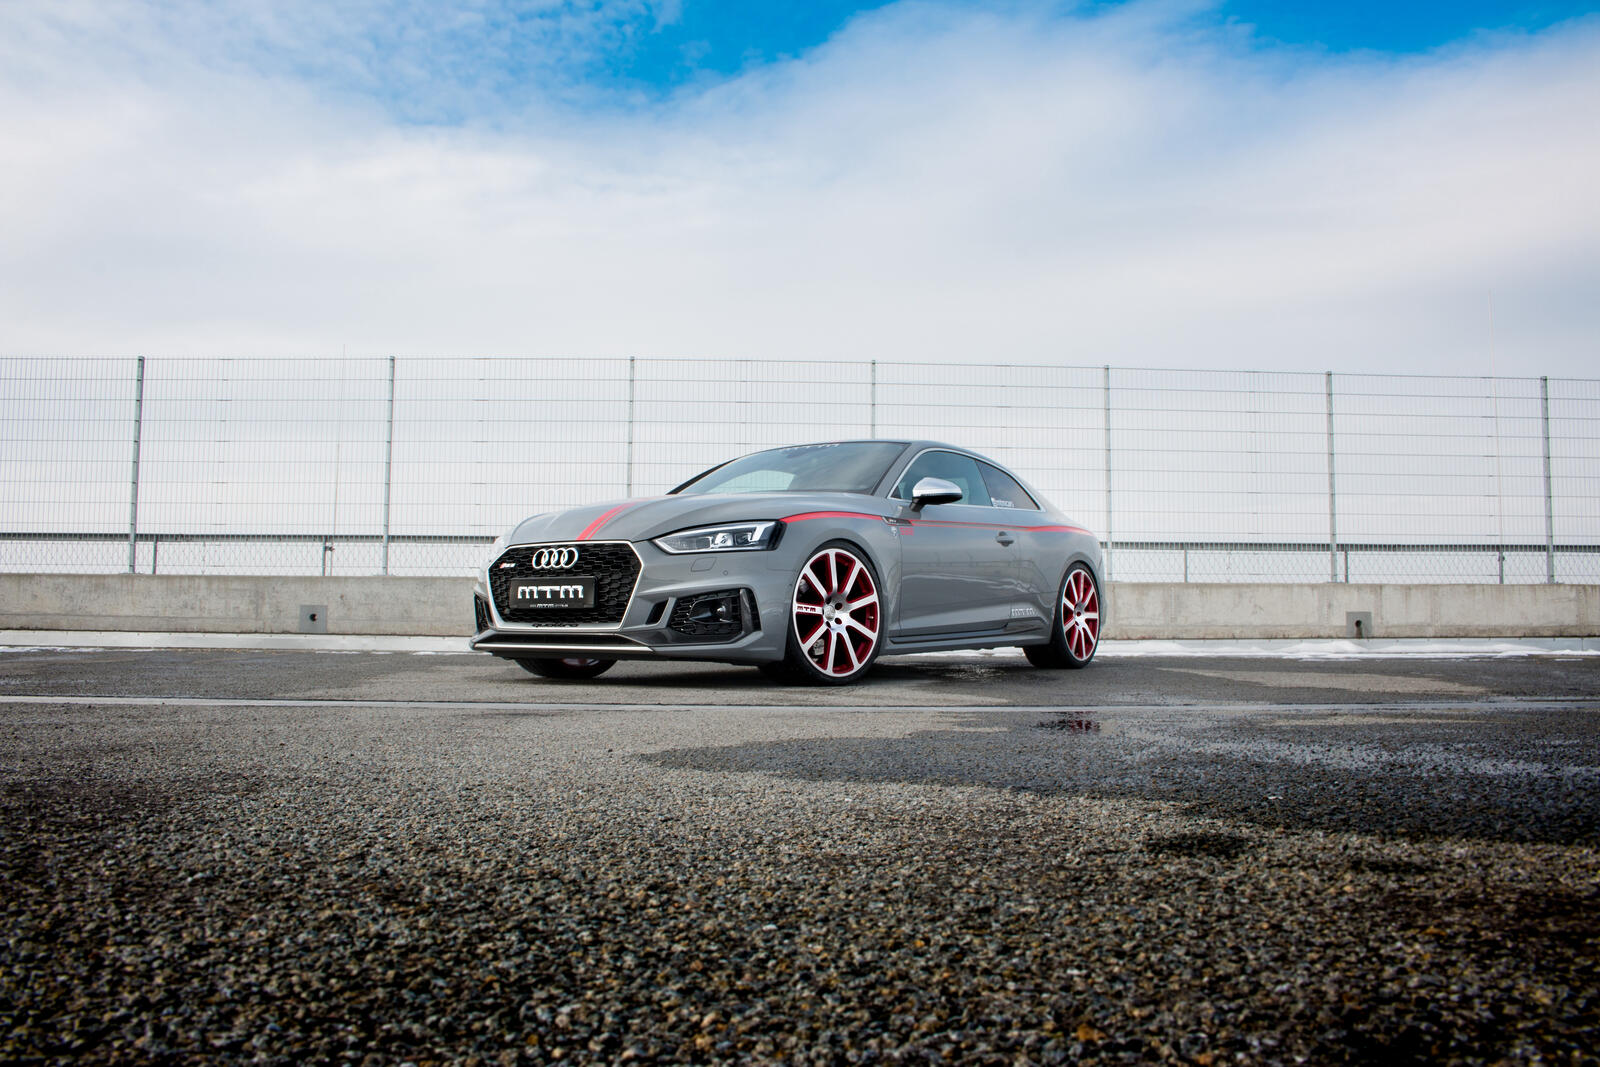 Wallpapers Audi Rs5 cars gray car on the desktop